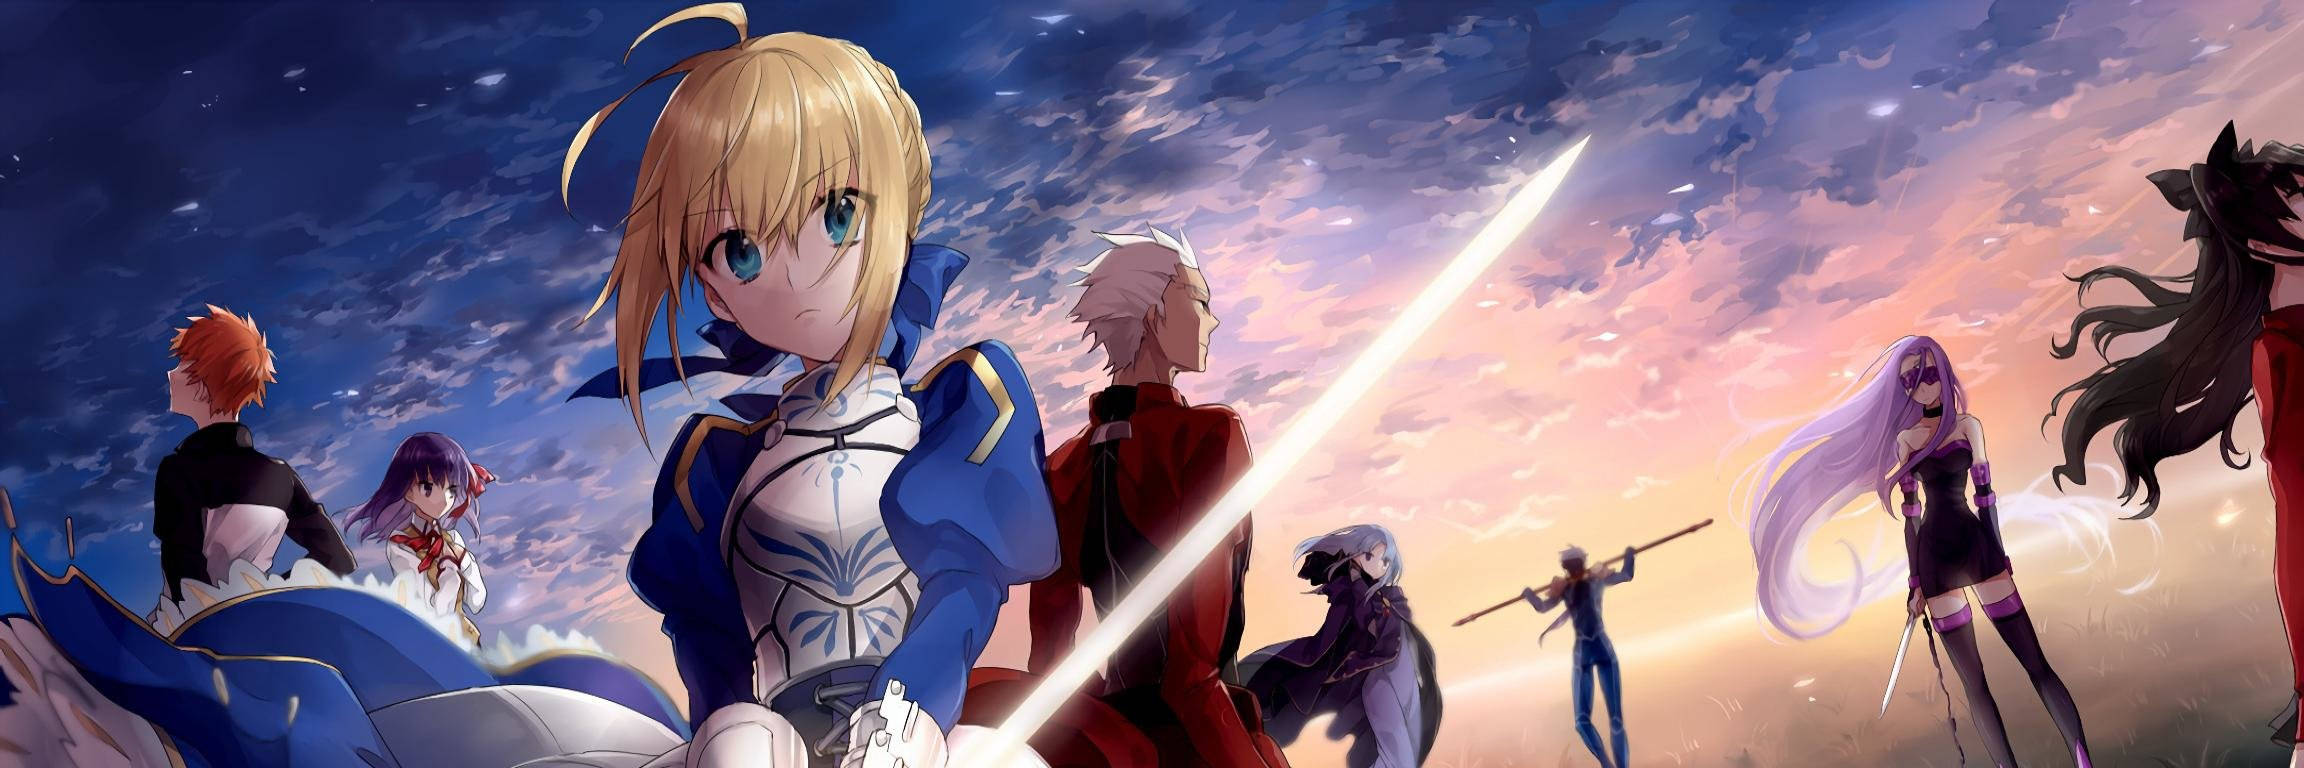 Fate / Stay Night Anime Characters Wallpaper